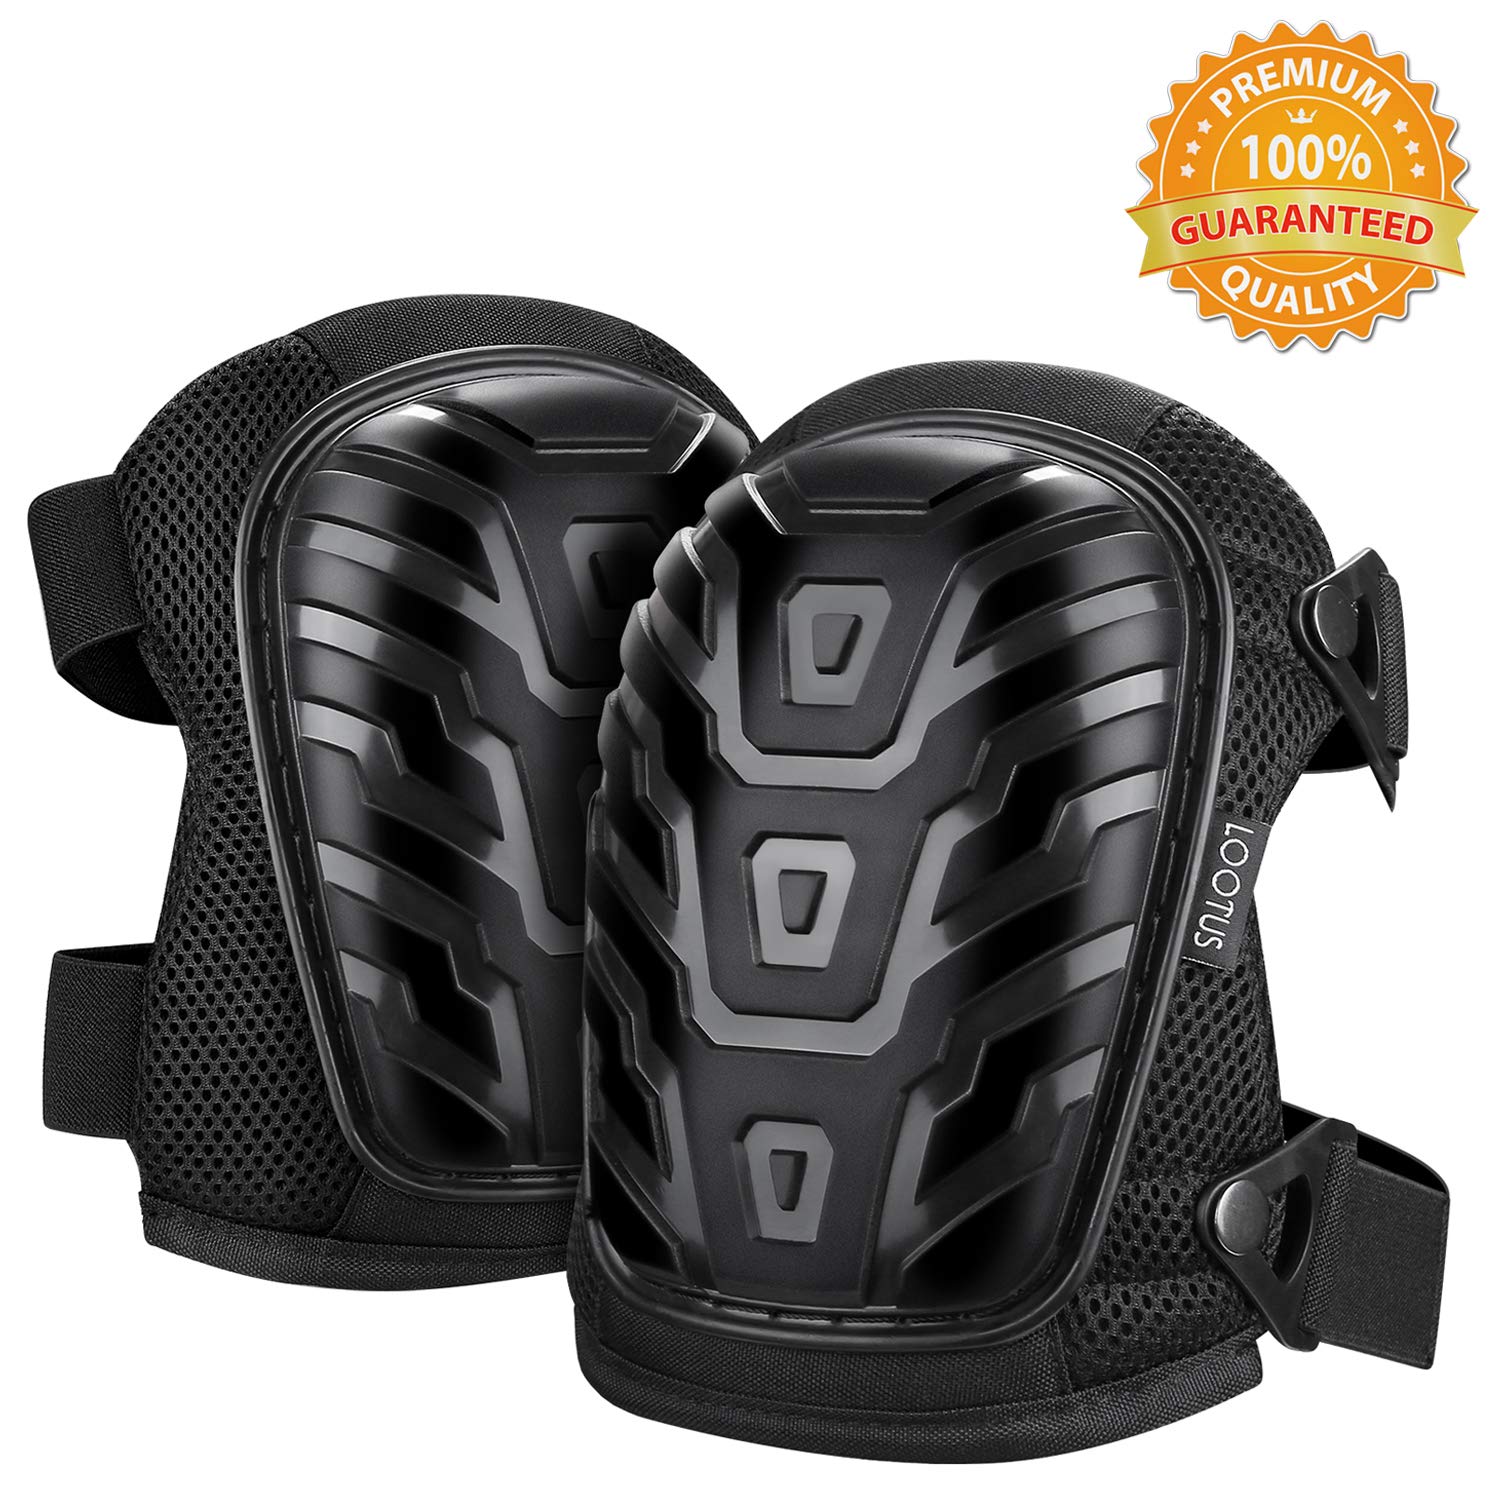 Professional Knee Pads for Work 